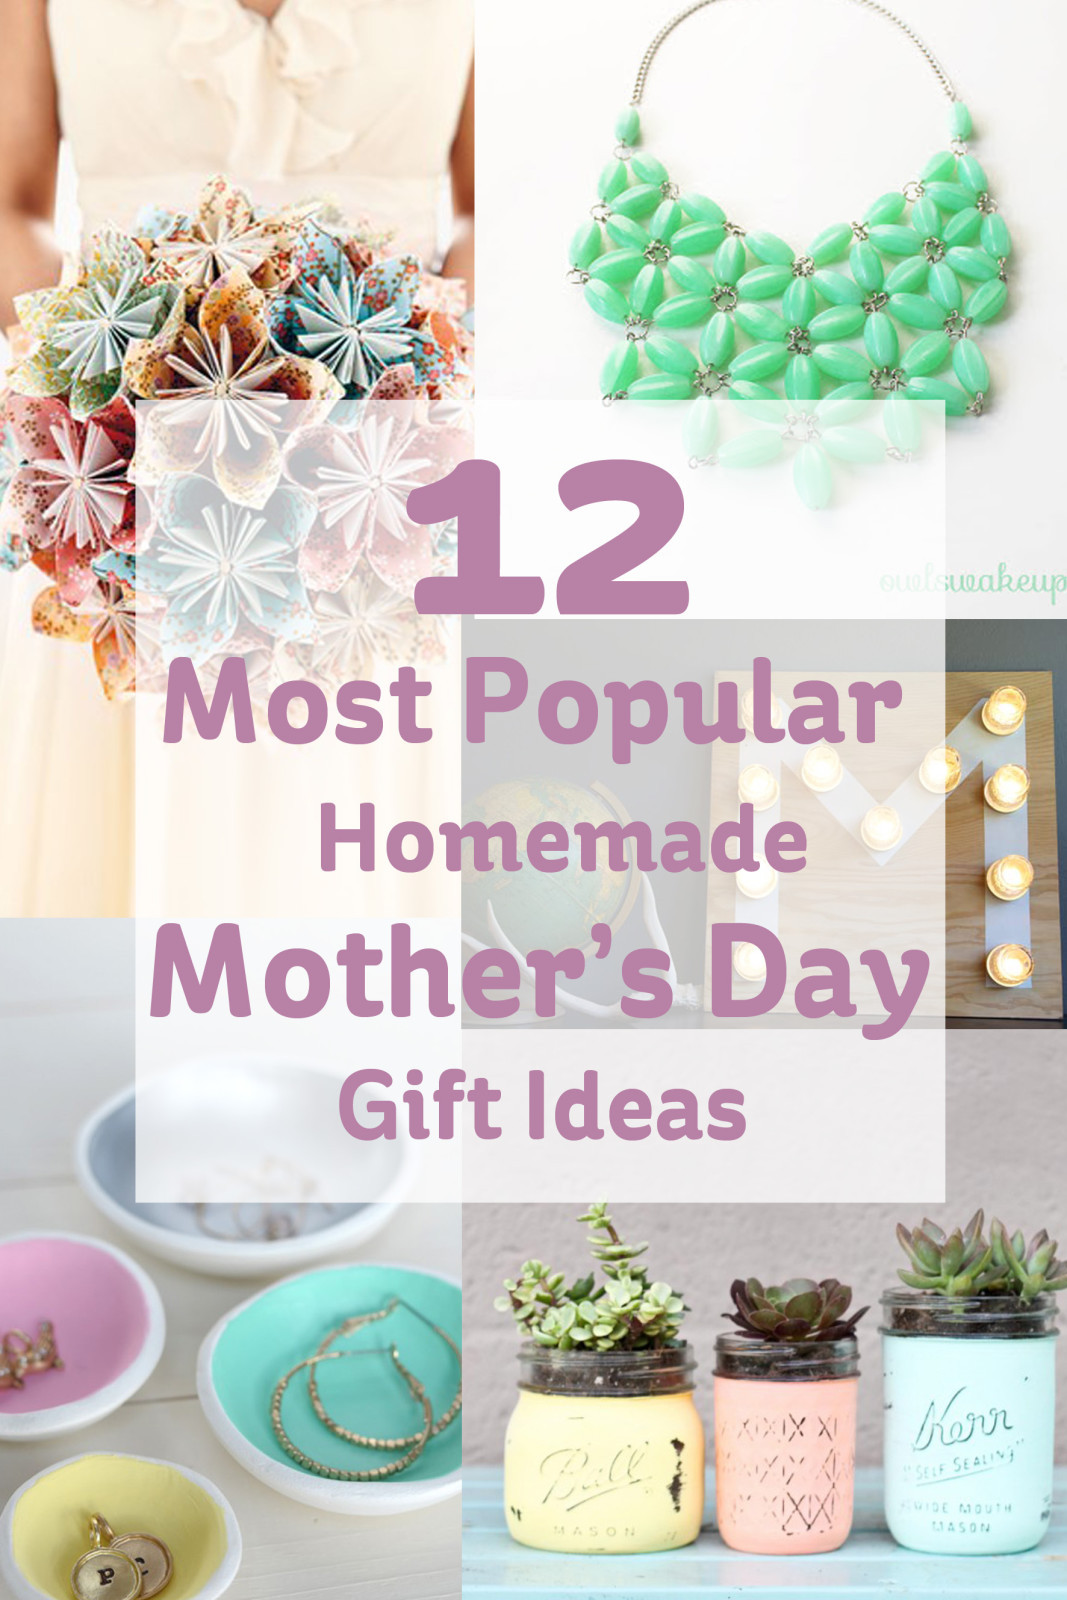 Mother Day Gift Ideas Homemade
 12 Most Popular Homemade Mother s Day Gift Ideas